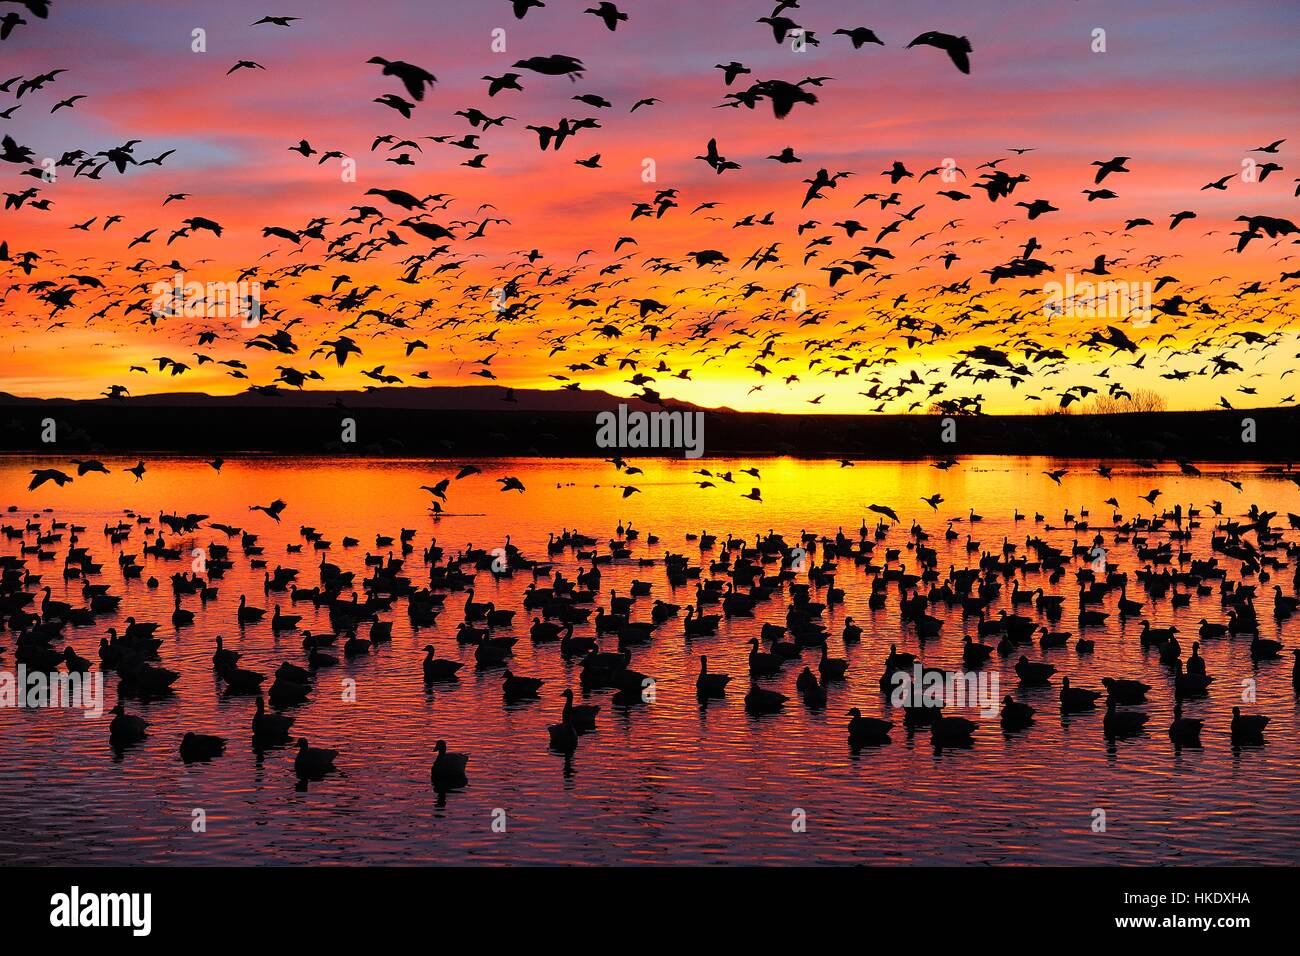 Many snow geese (Anser caerulescens) and Ross's geese (Anser rossii) at sunrise, Bosque del Apache, New Mexico, USA Stock Photo